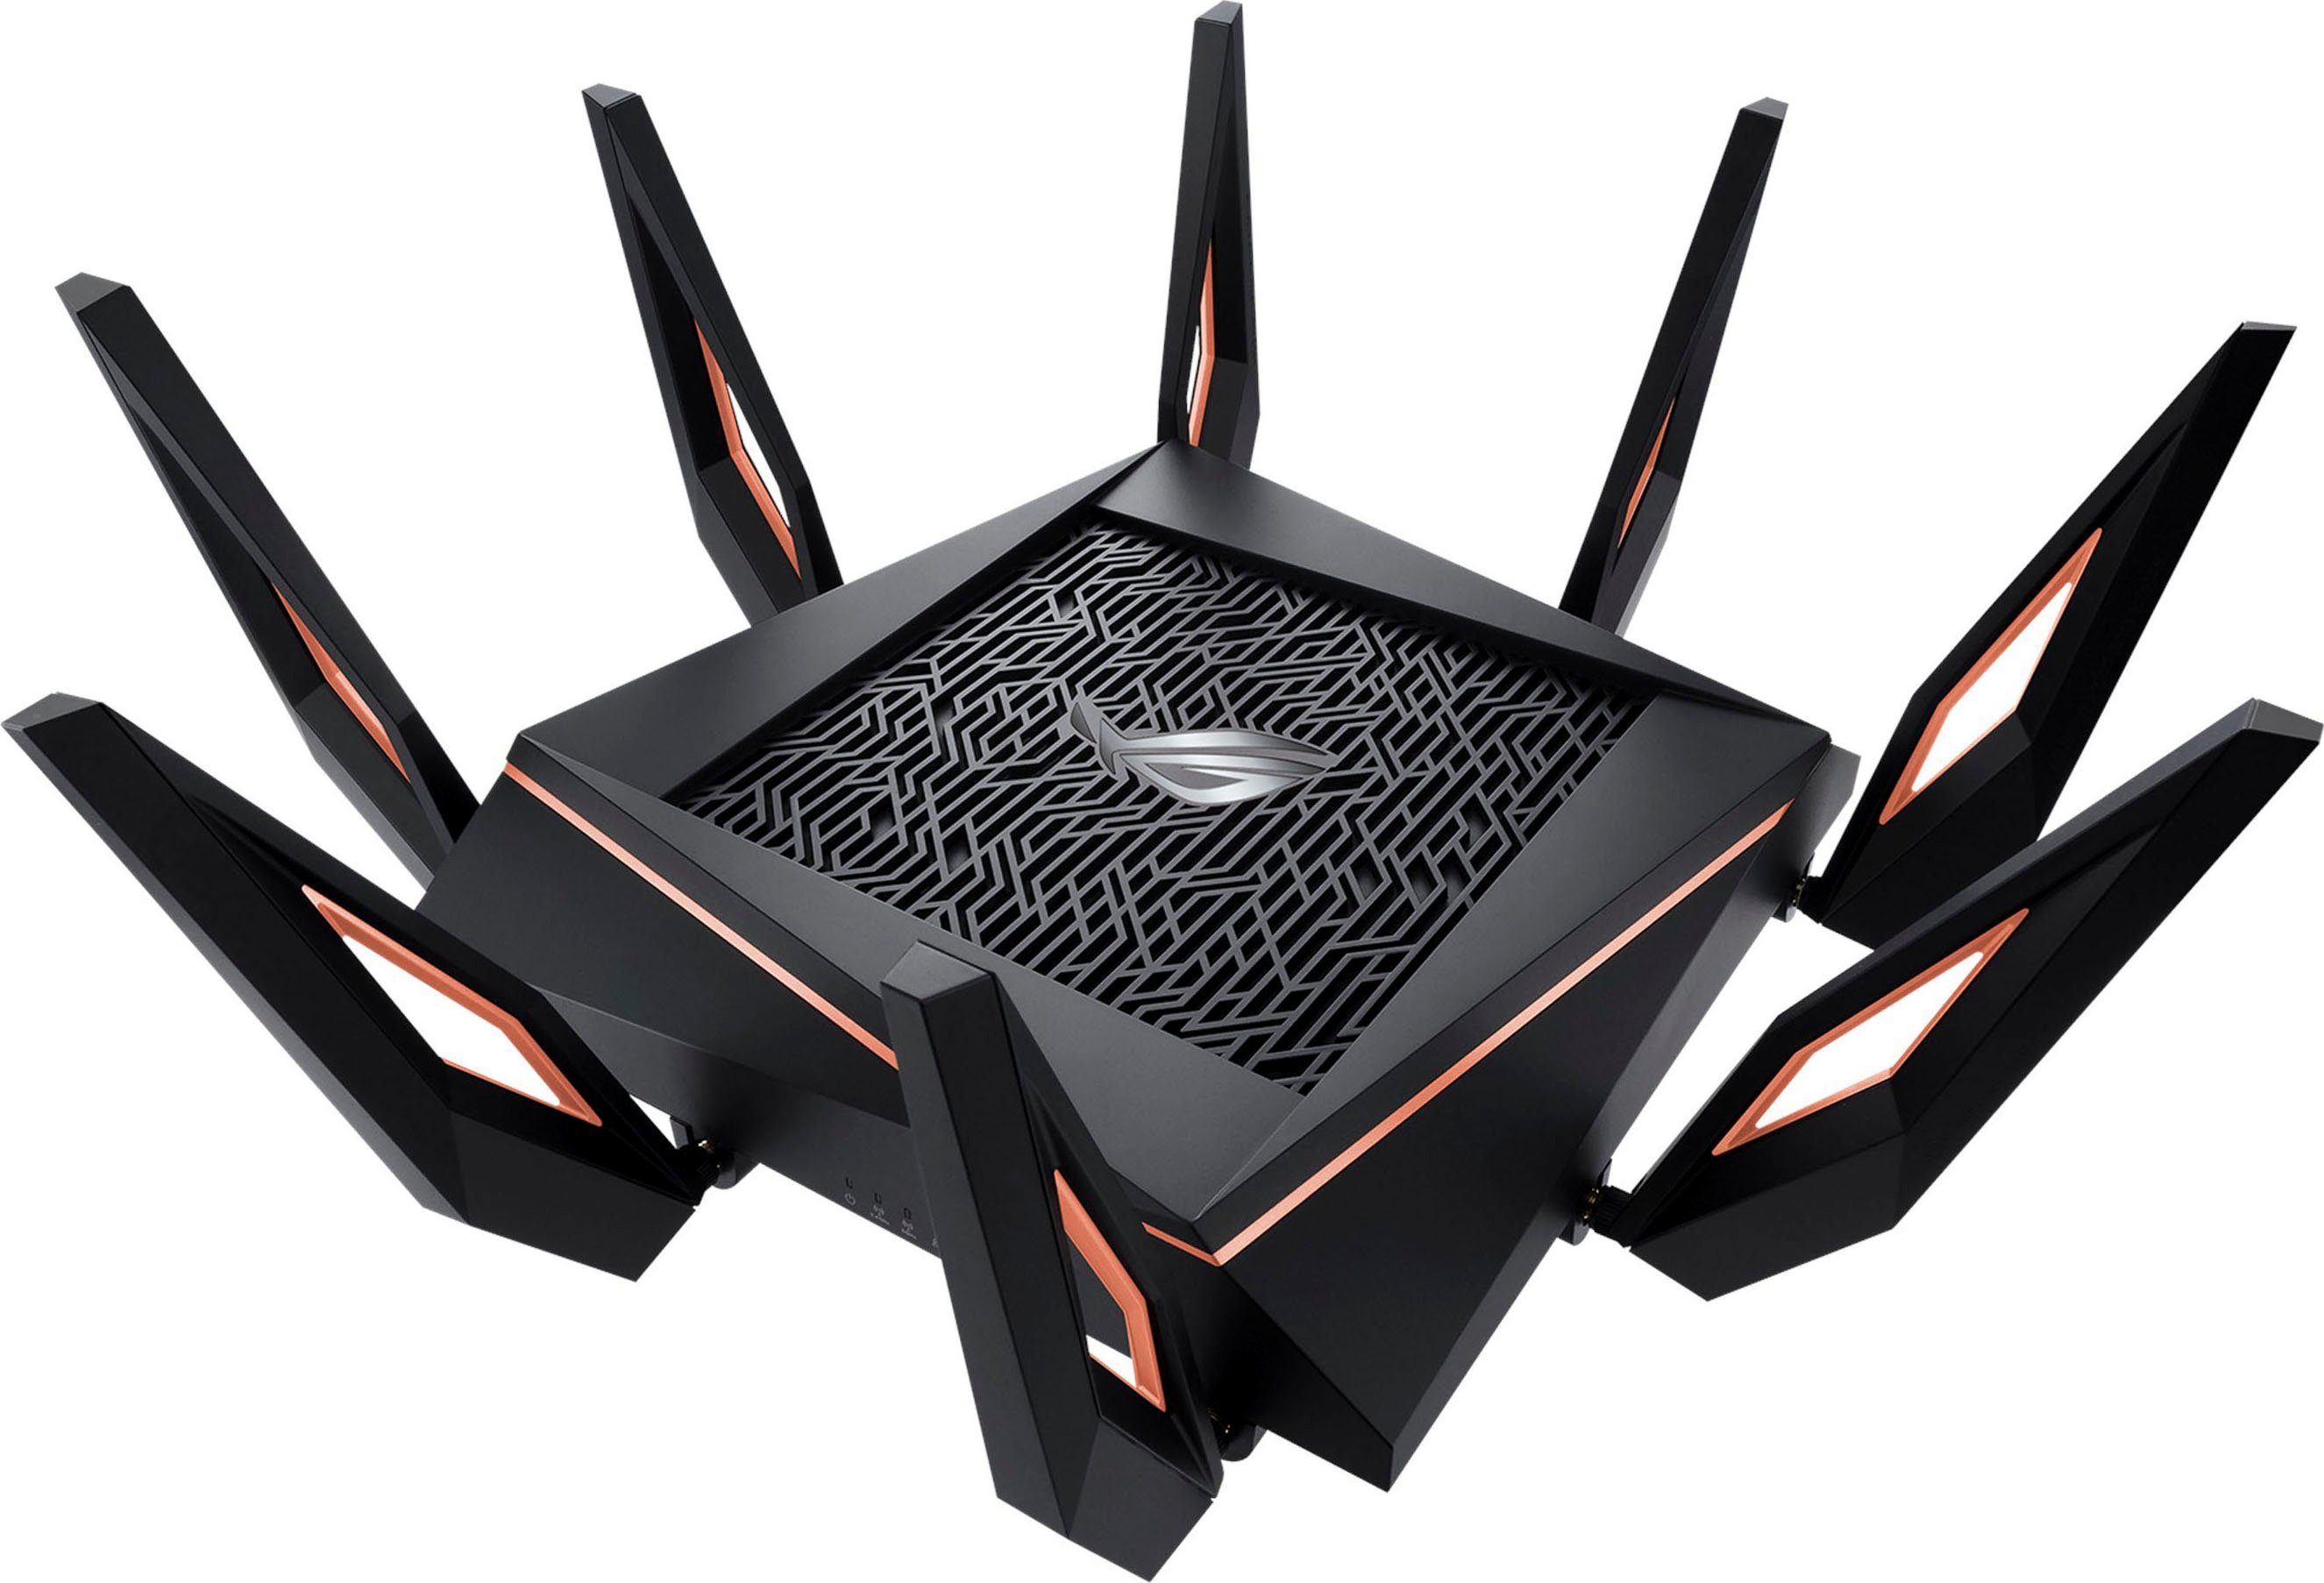 WLAN-Router GT-AX11000 Rapture Asus